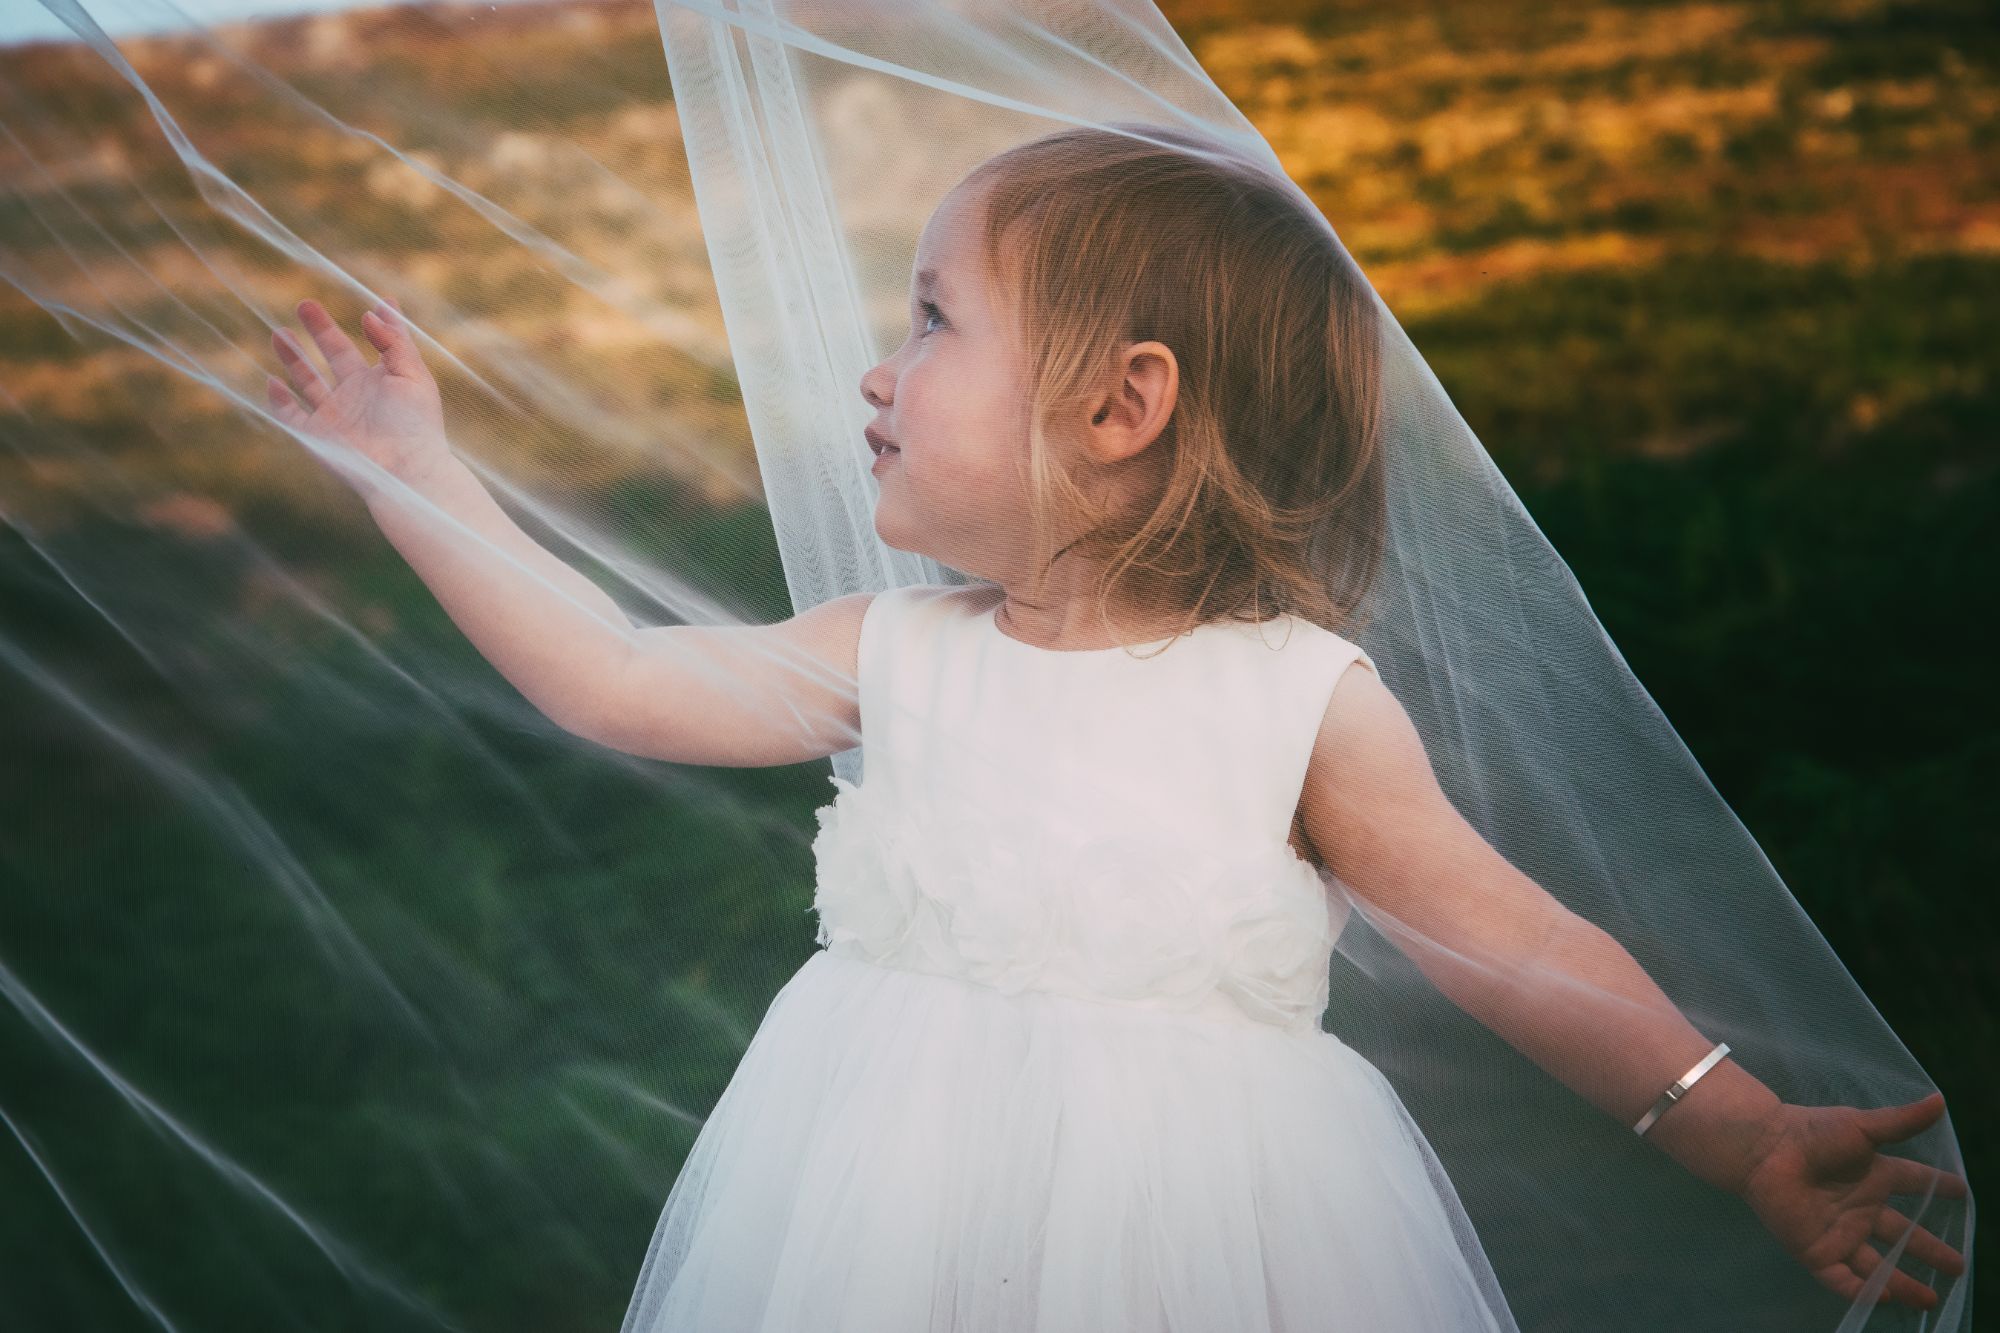 The bride and groom's daughter stands under her Mum's veil and plays with it during their post wedding photoshoot.